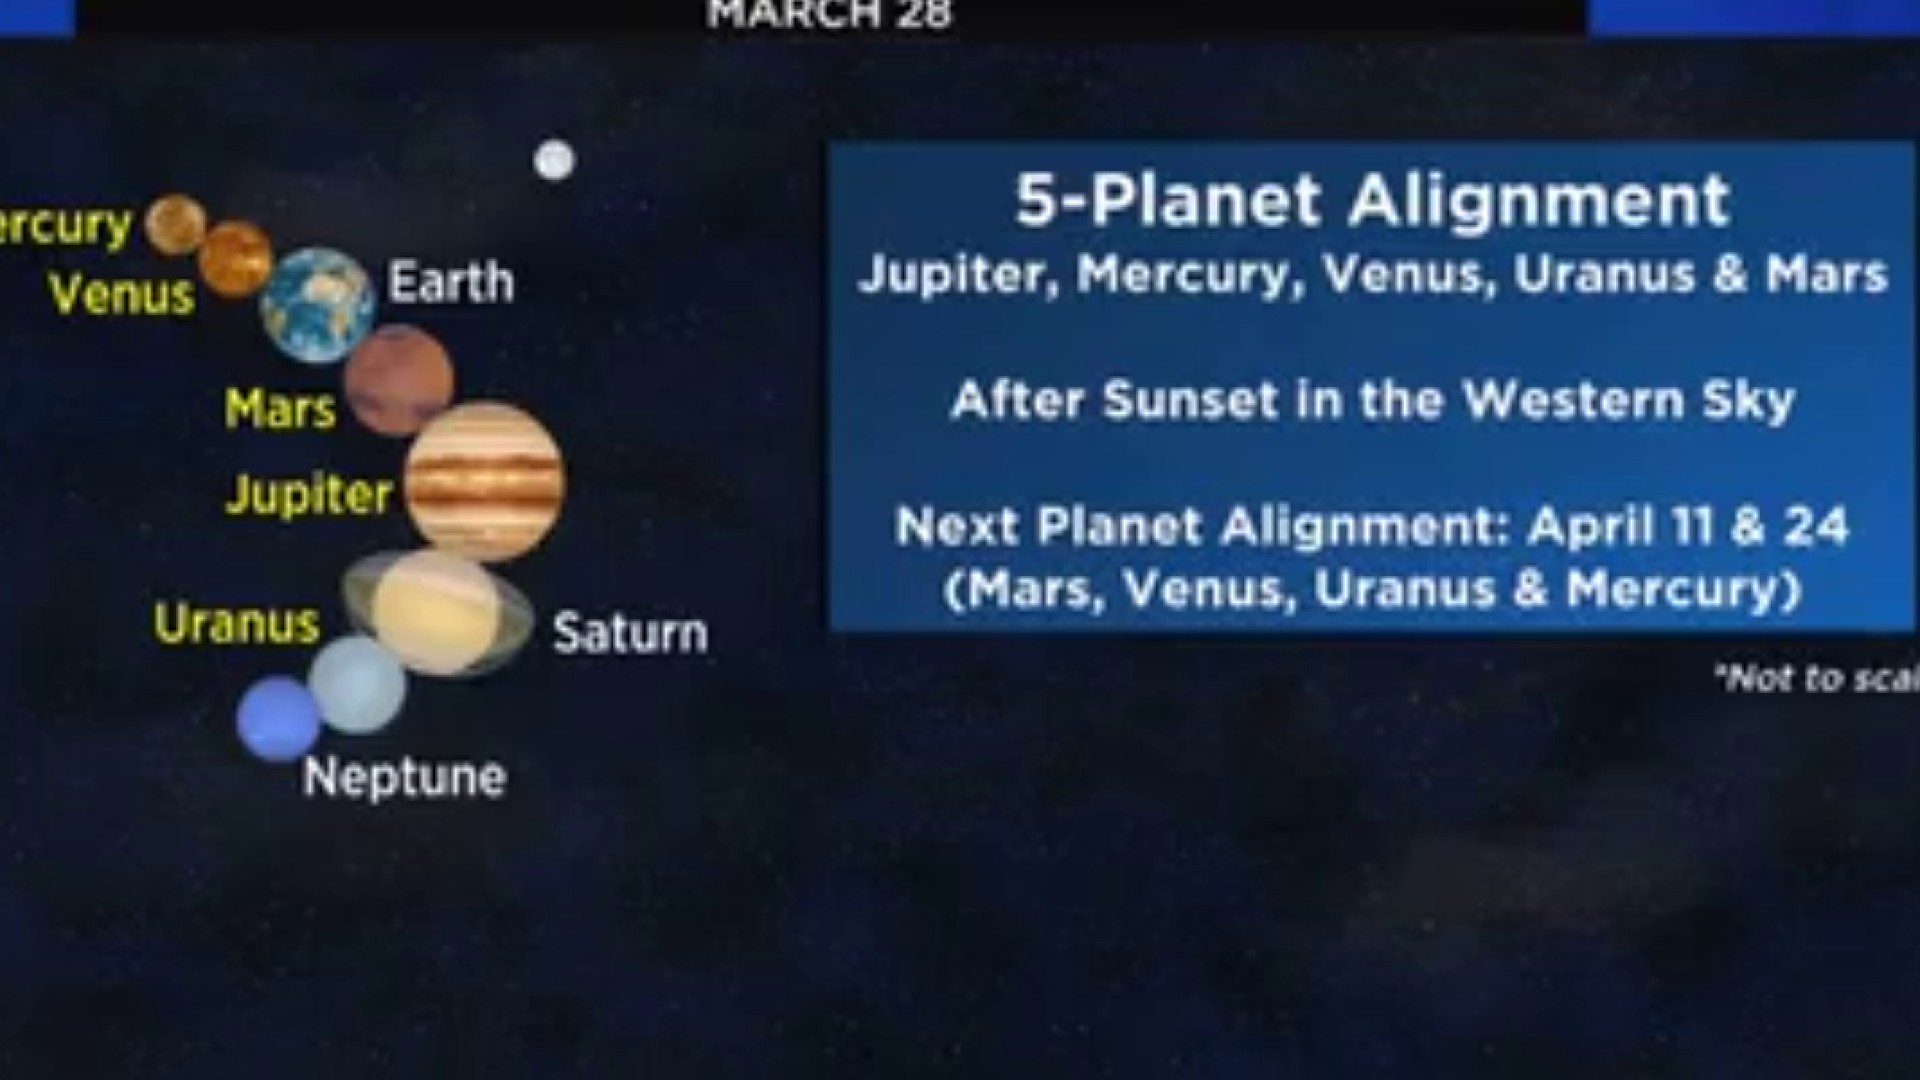 our planets are aligning